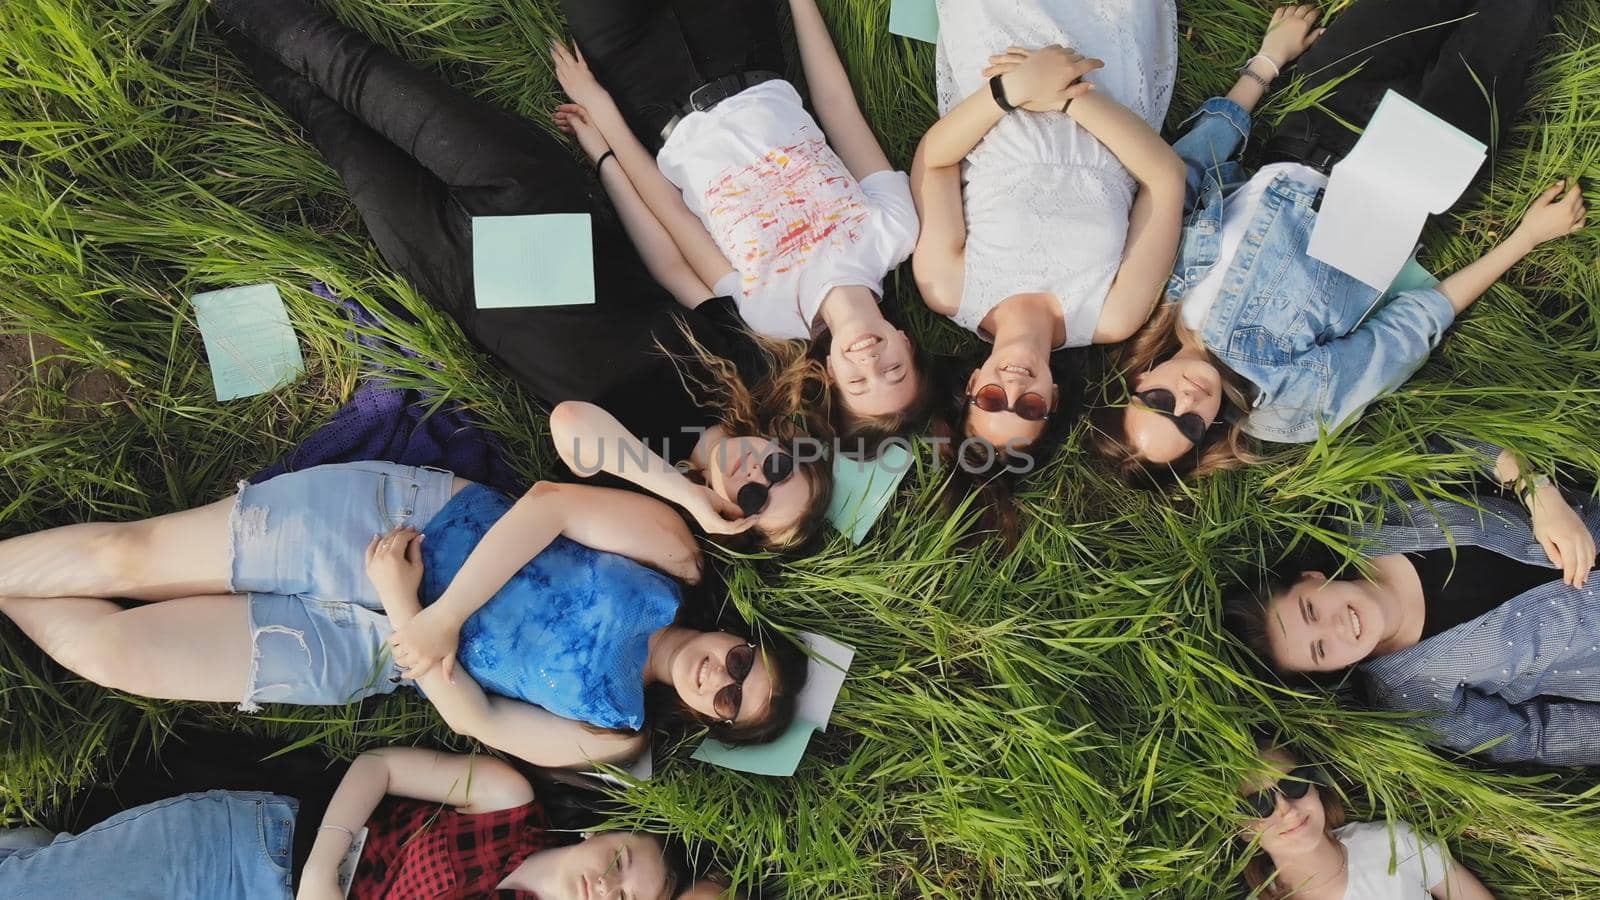 Girls students lie on the grass in a city park with notebooks. by DovidPro